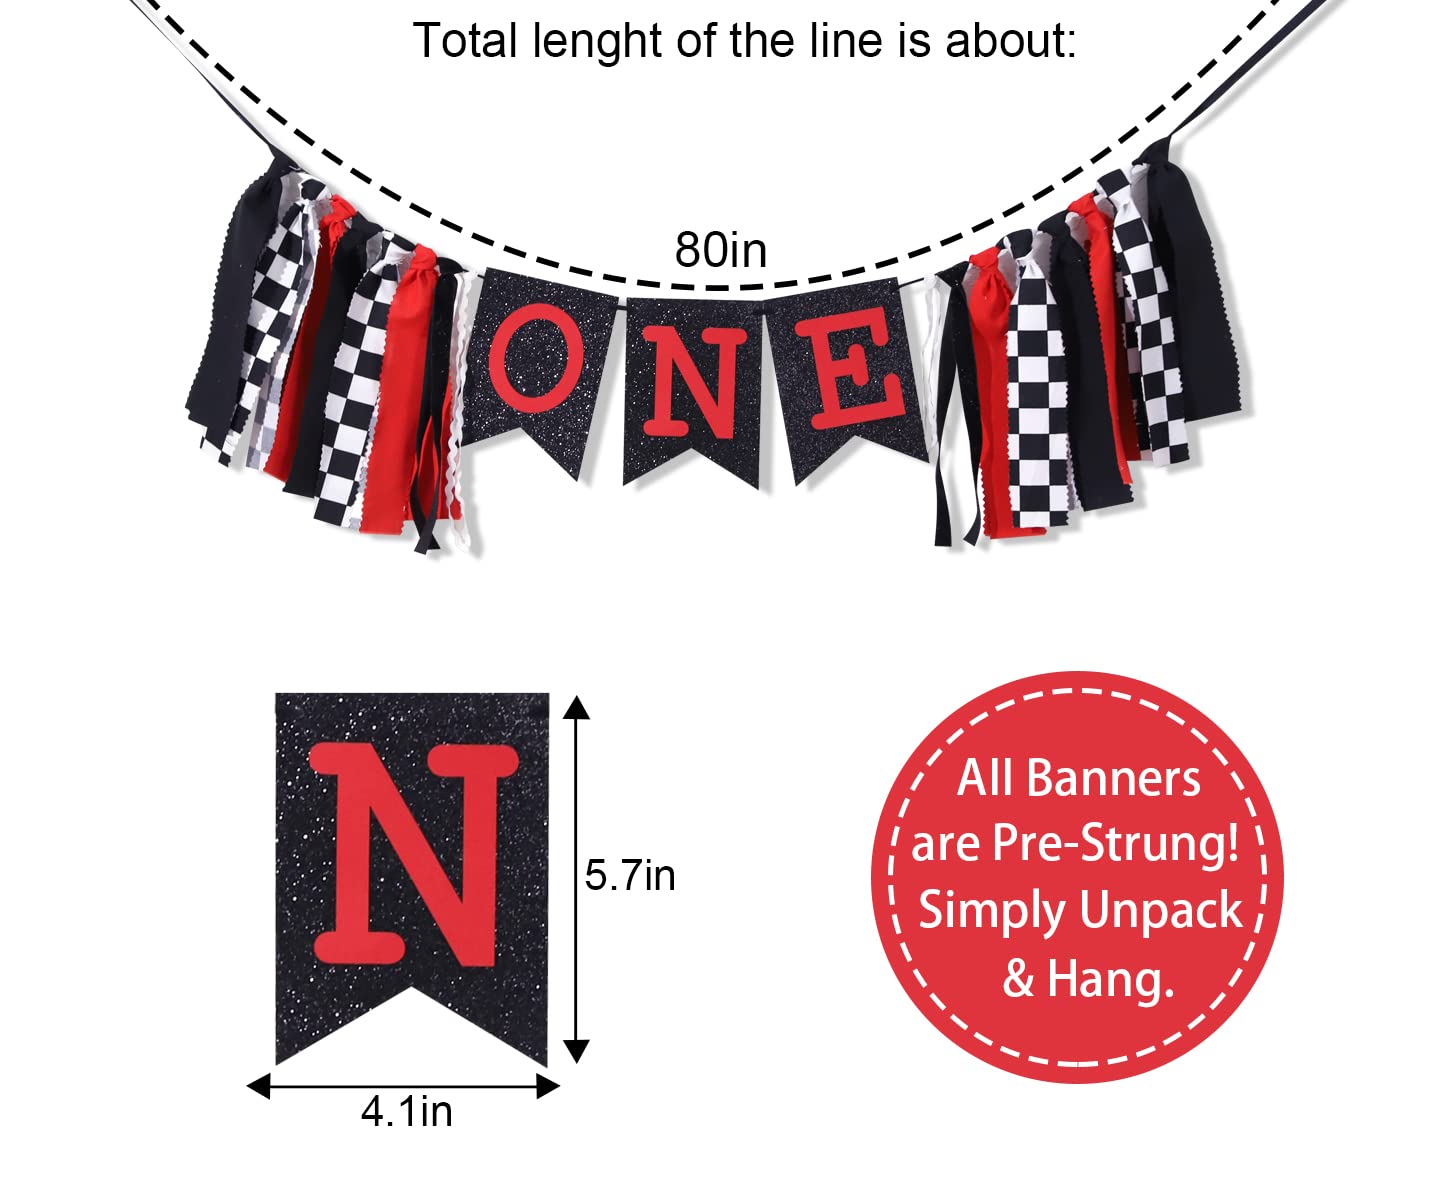 Racing High Chair Banner,Racing First/1st Birthday Party Decorations,racing First/1st High Chair Banner,checkered Flag Racing Birthday Decorations, Race Car First Birthday Cake Smash Photo Props